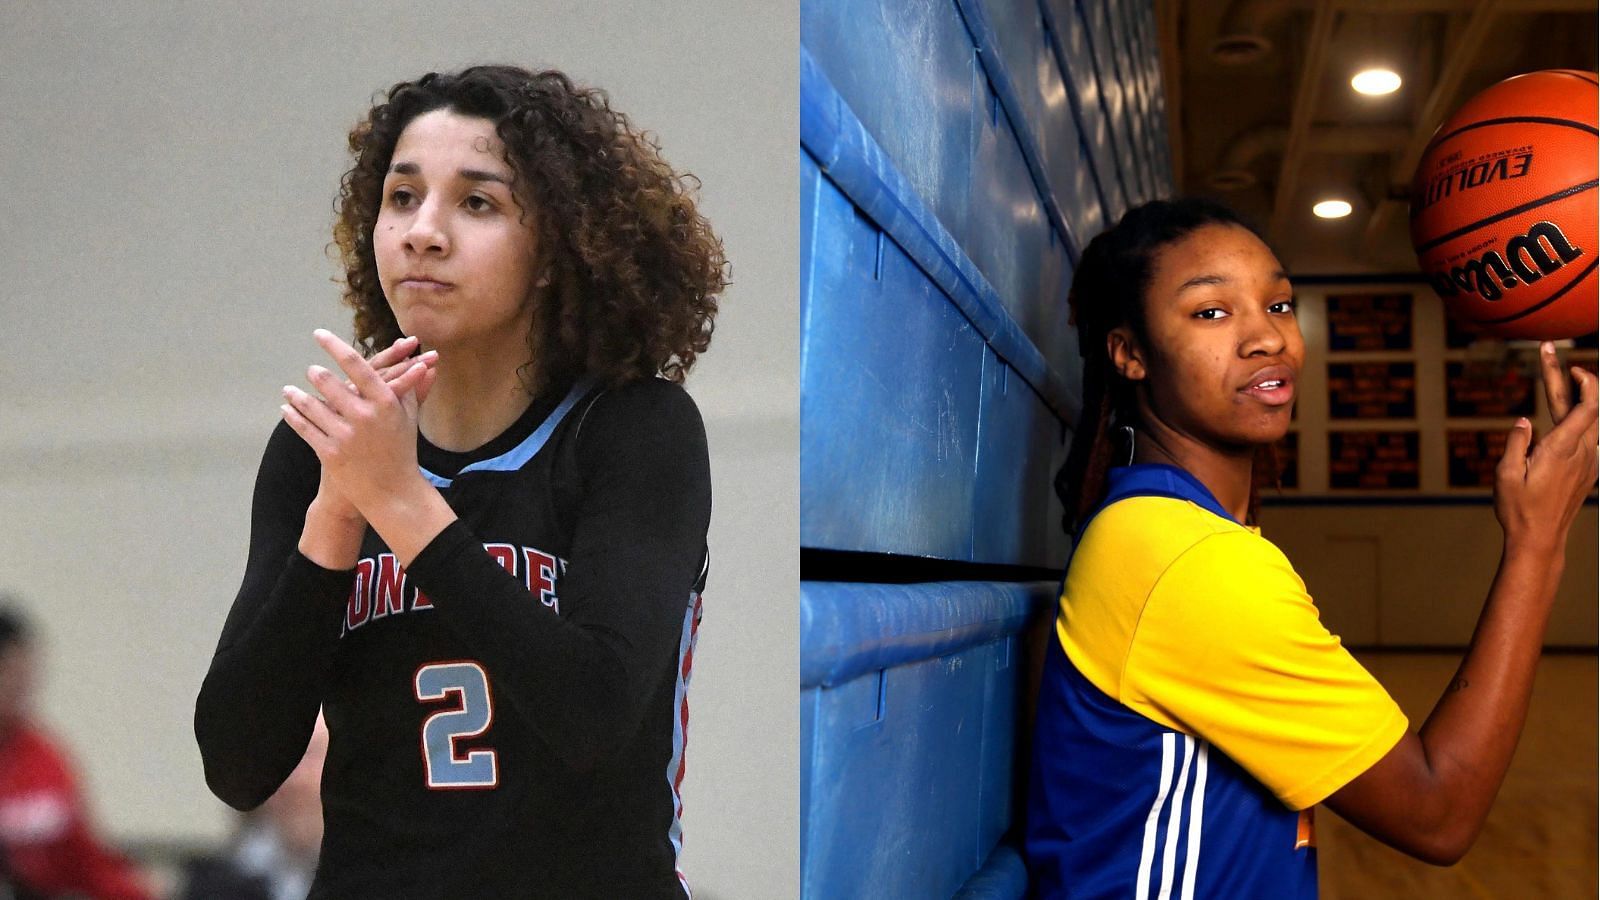 Top 2025 recruits include Aaliyah Chavez and Divine Bourrage (Photo Credits: Chavez by Lubbock Avalanche-Journal, Bourrage by Iowa City Press-Citizen)